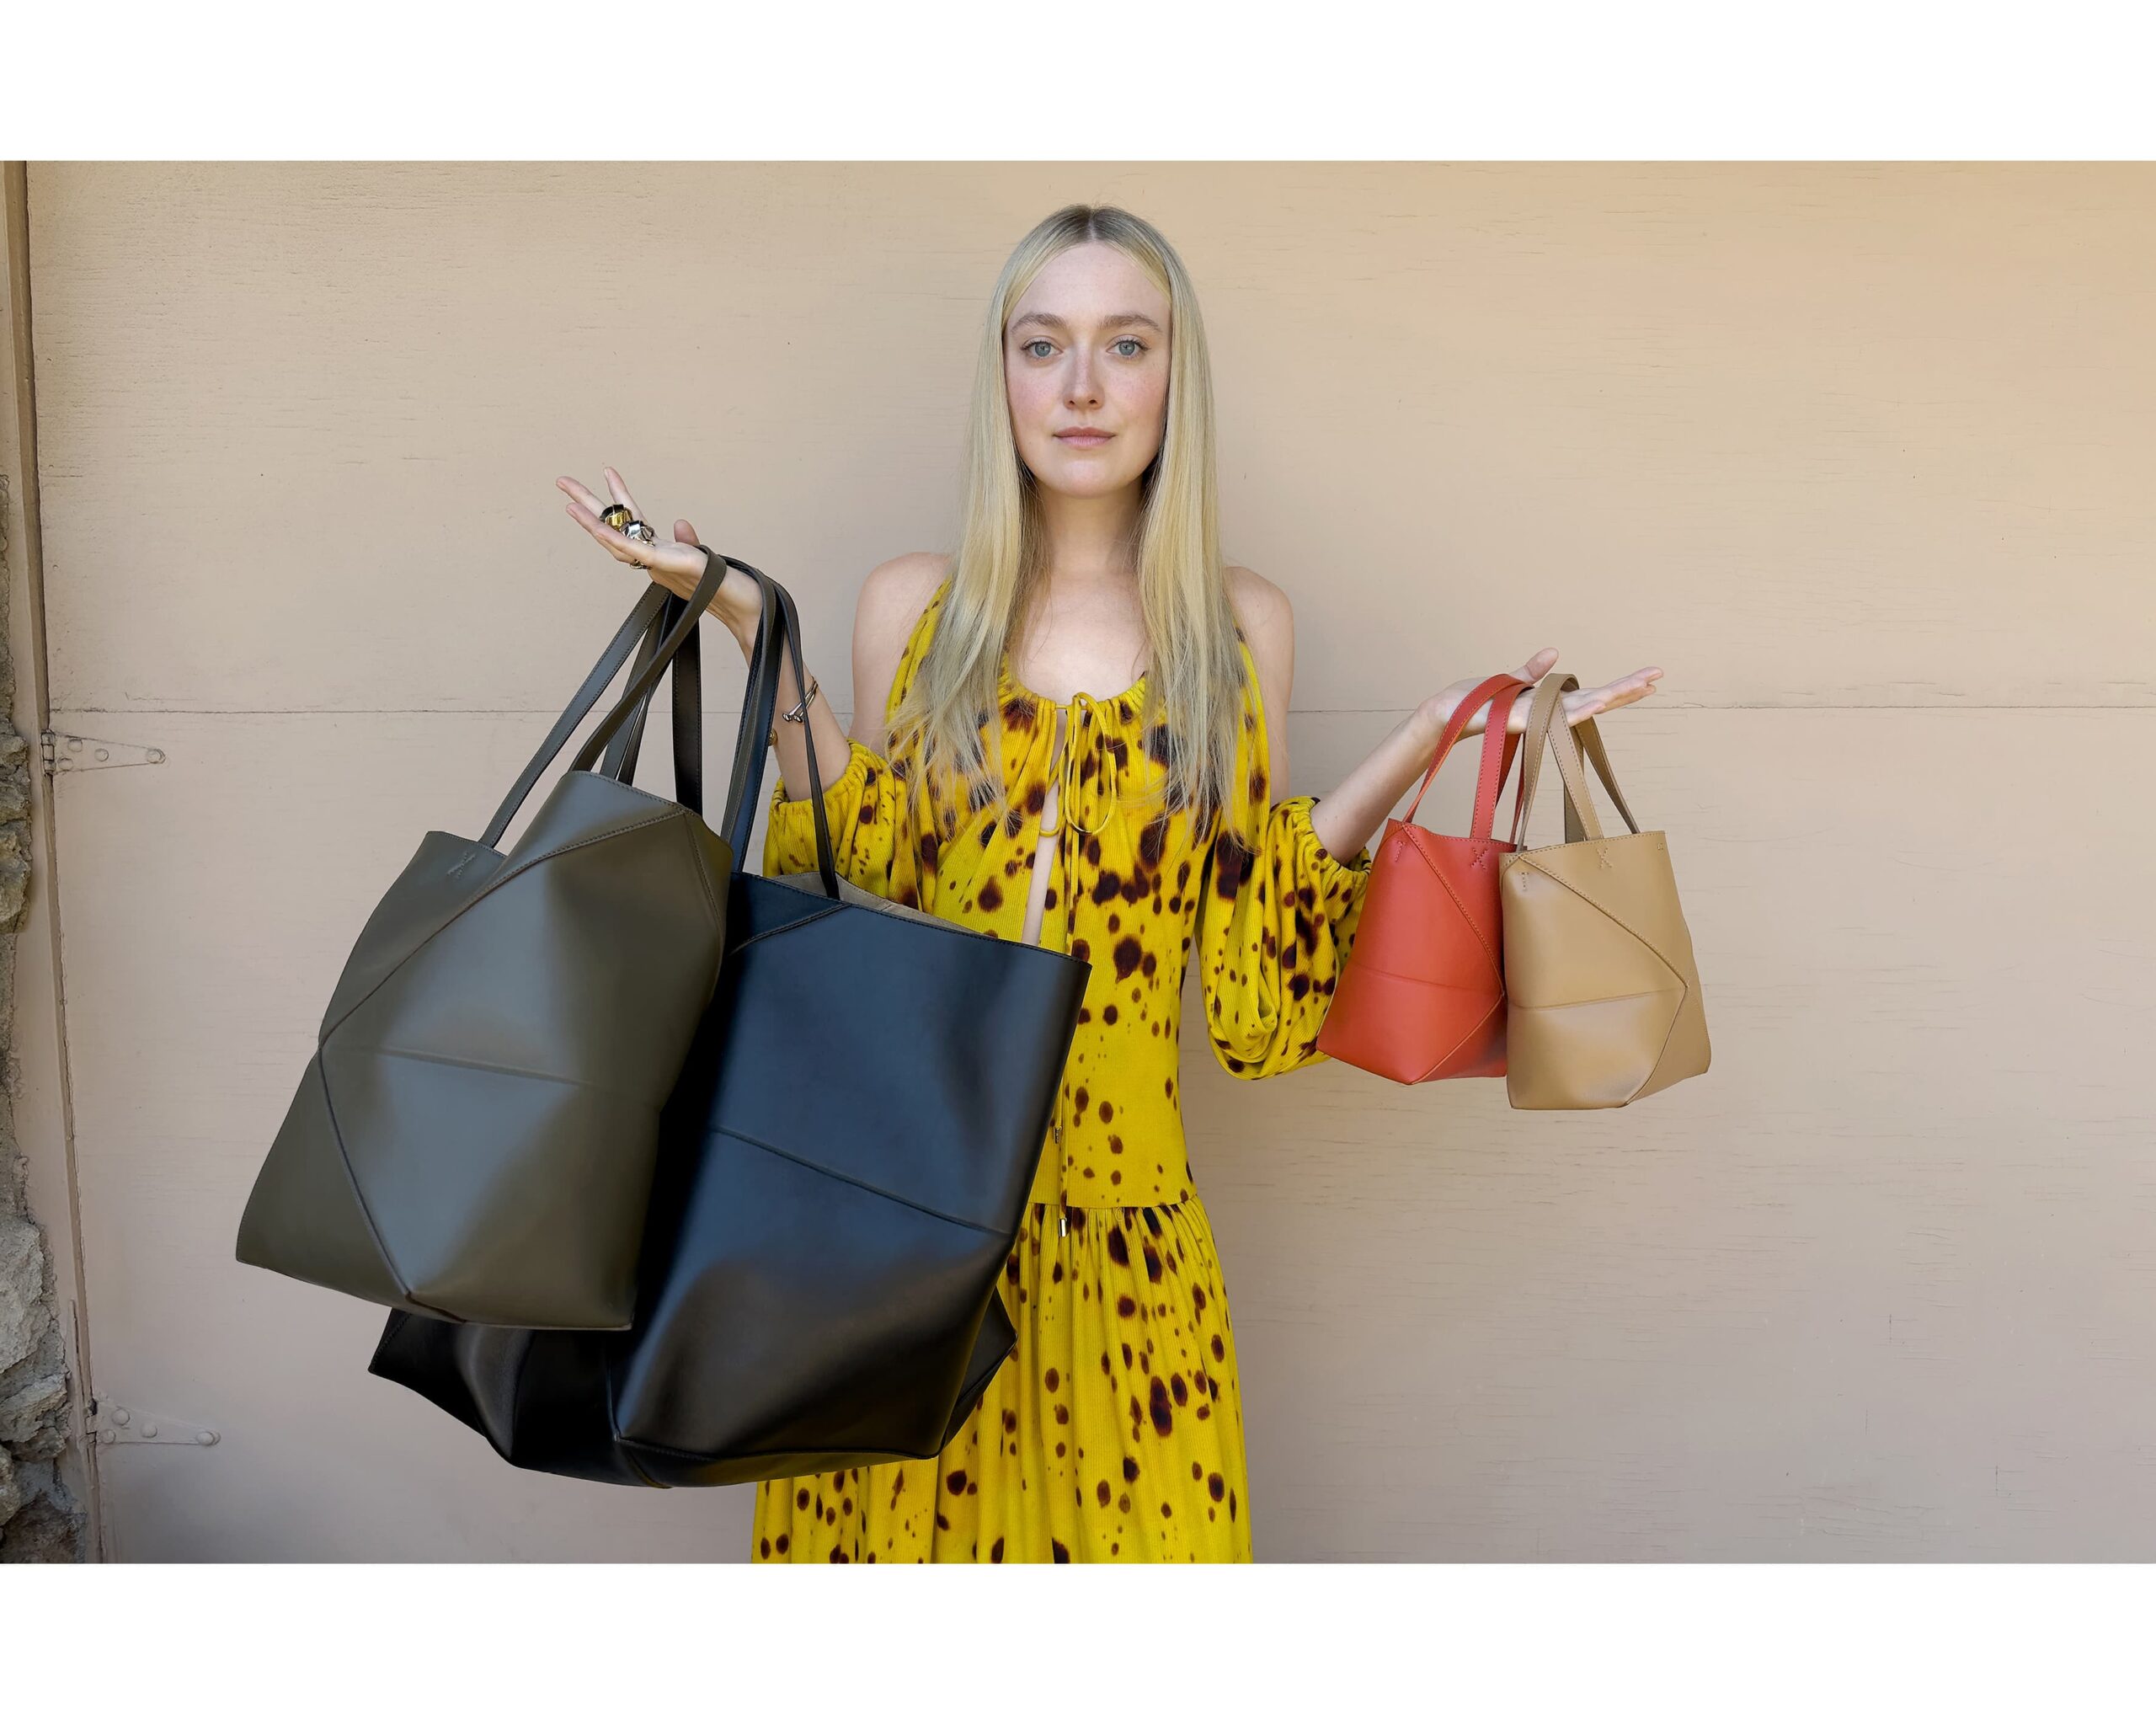 Dakota Fanning in a yellow patterned dress stands against a plain wall, holding three LOEWE tote bags in varying sizes and colors.